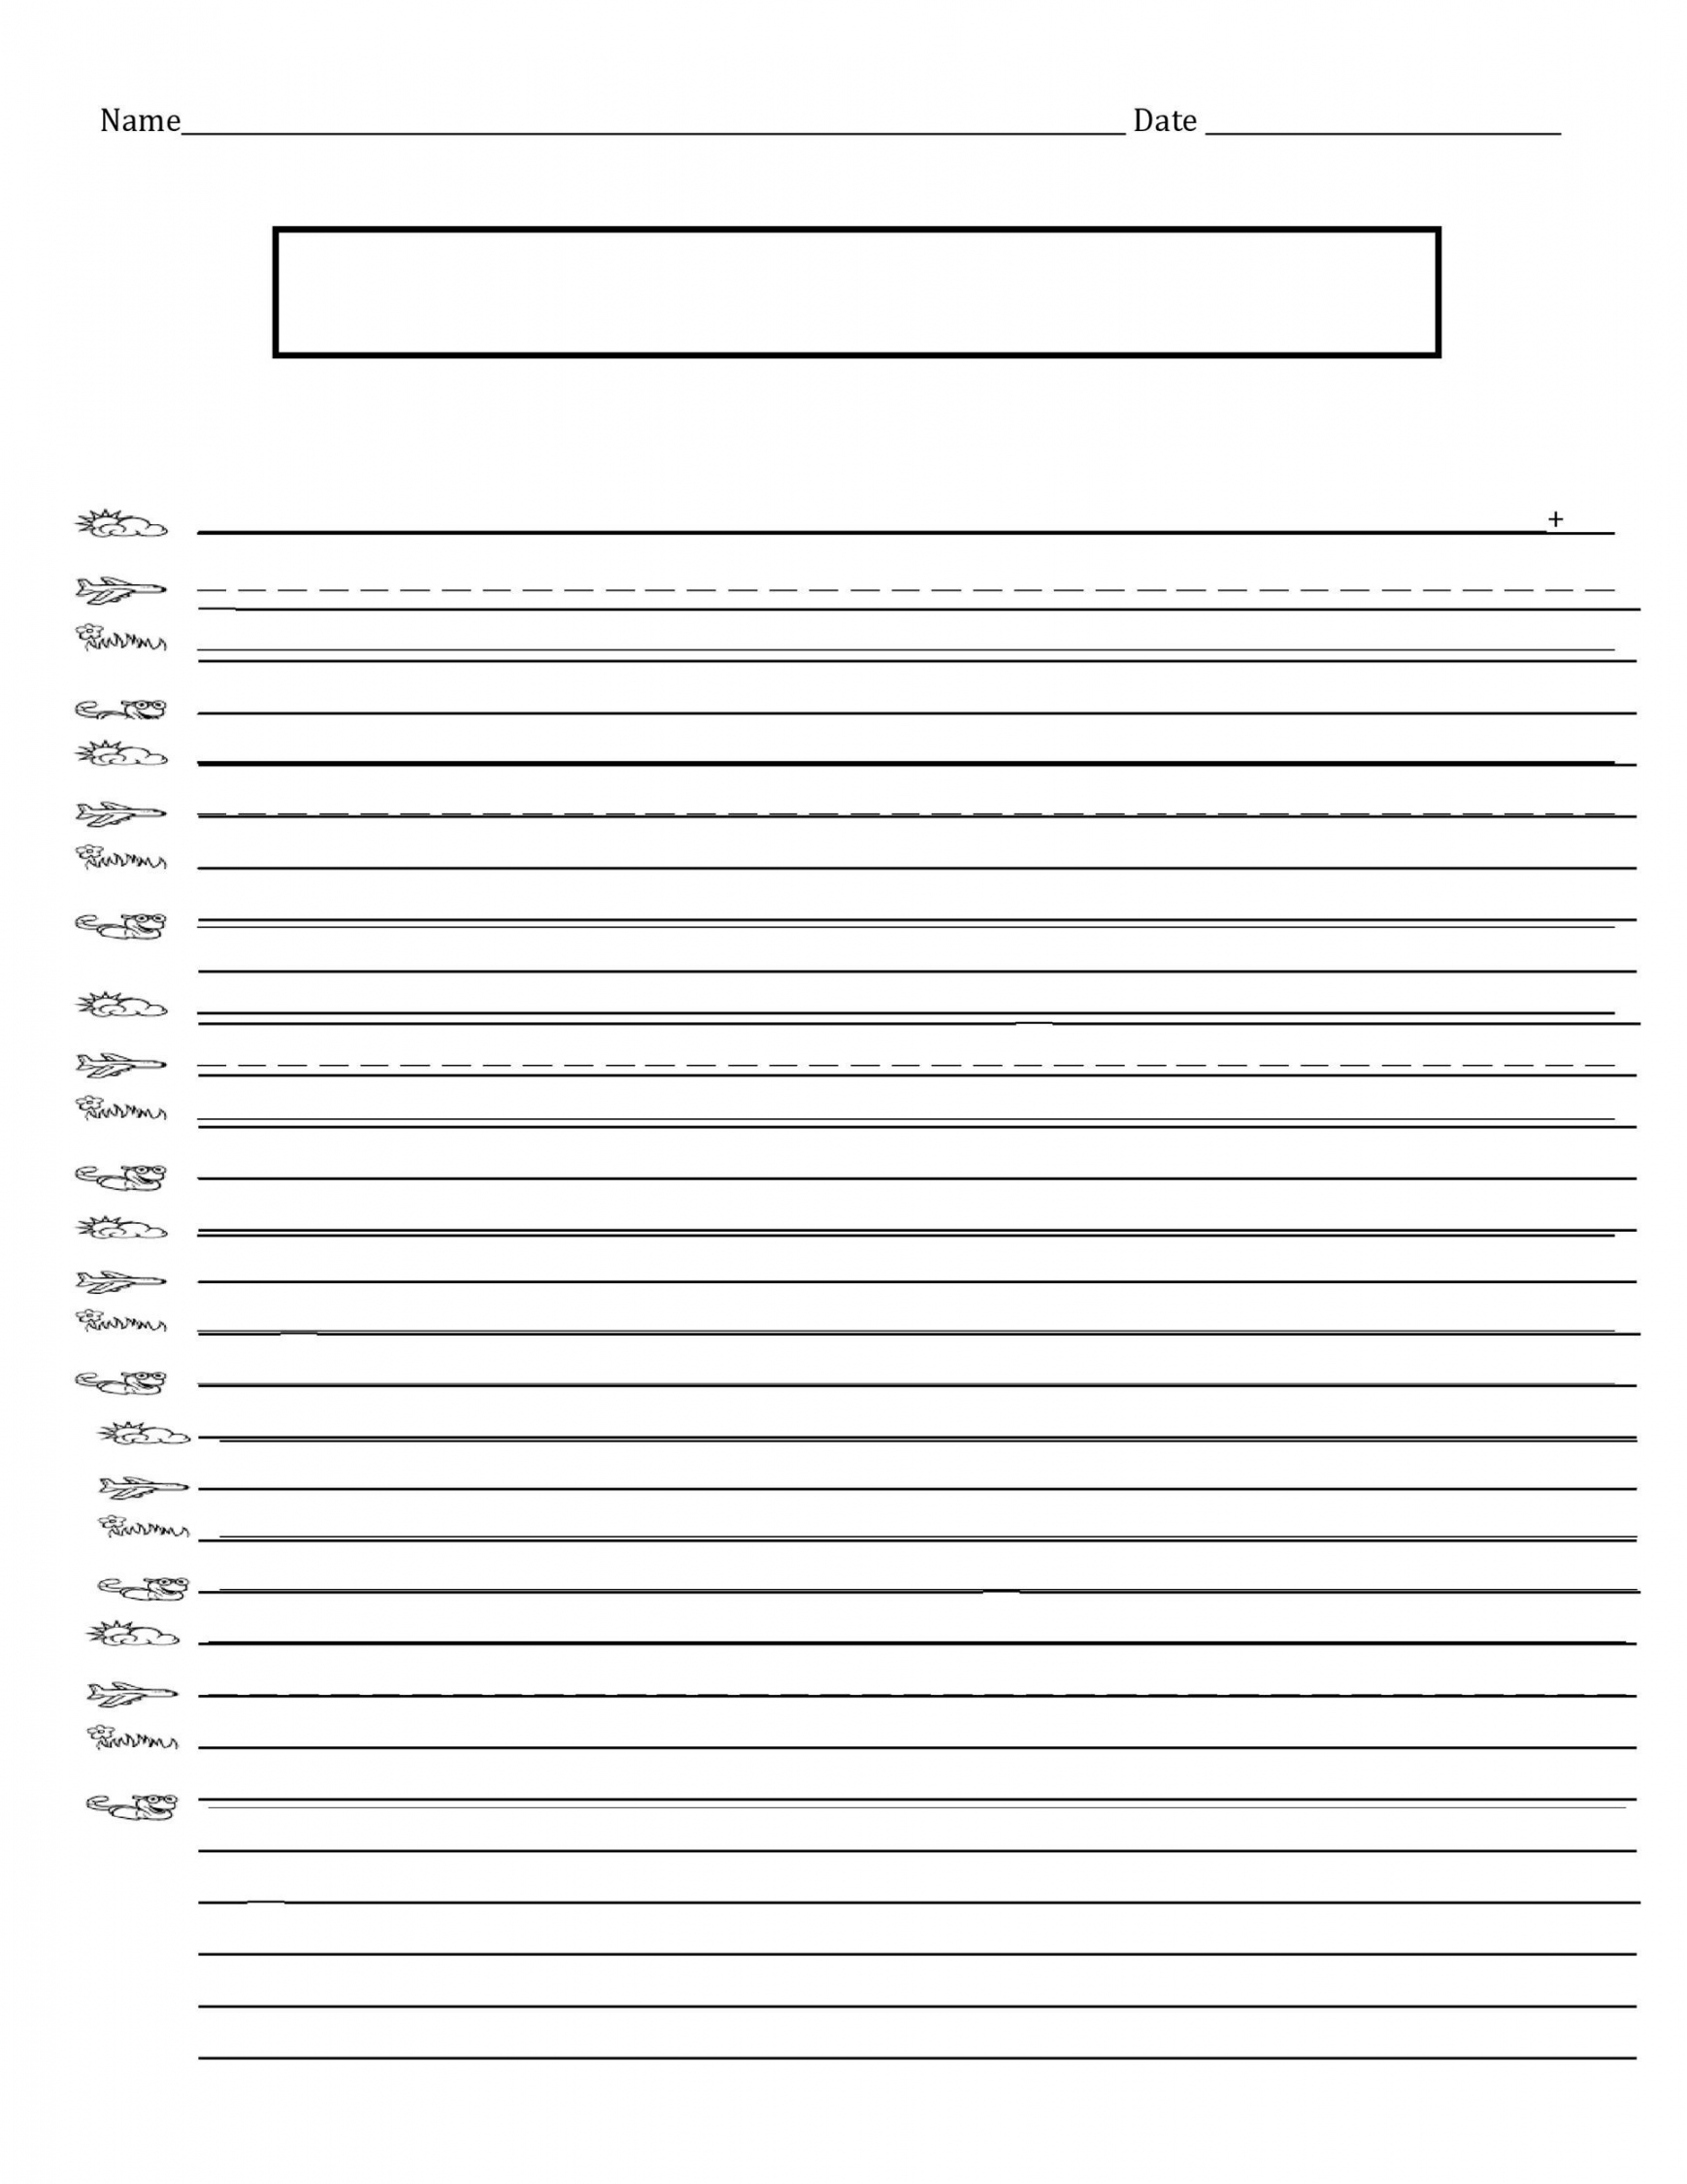 Printable Lined Paper Templates ᐅ TemplateLab - FREE Printables - Free Printable Lined Paper